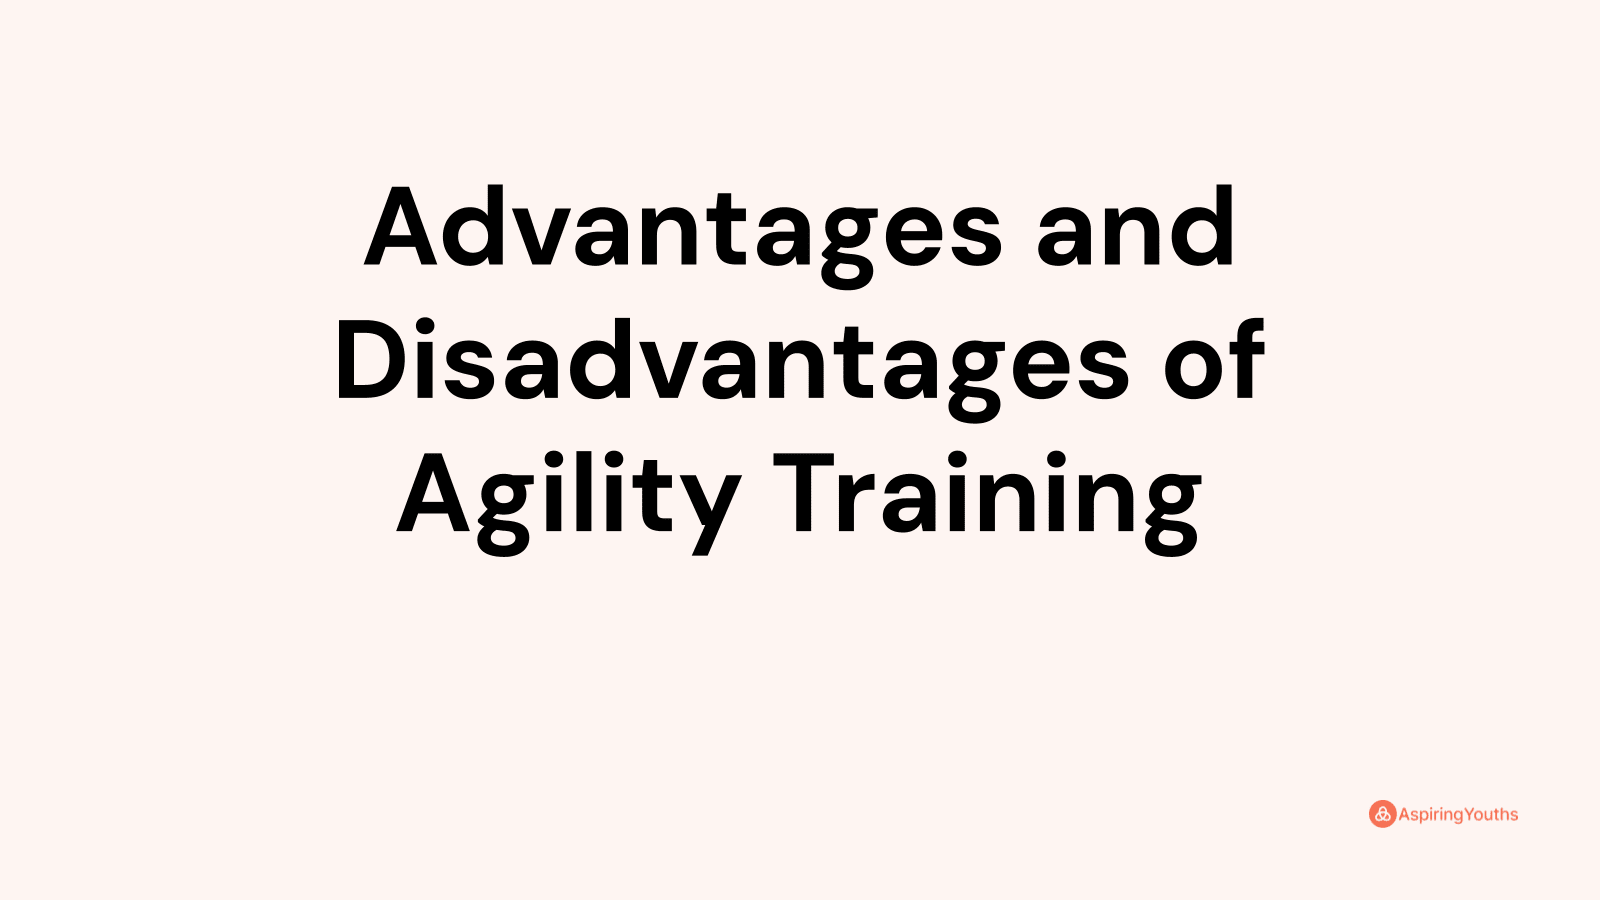 Advantages and disadvantages of Agility Training